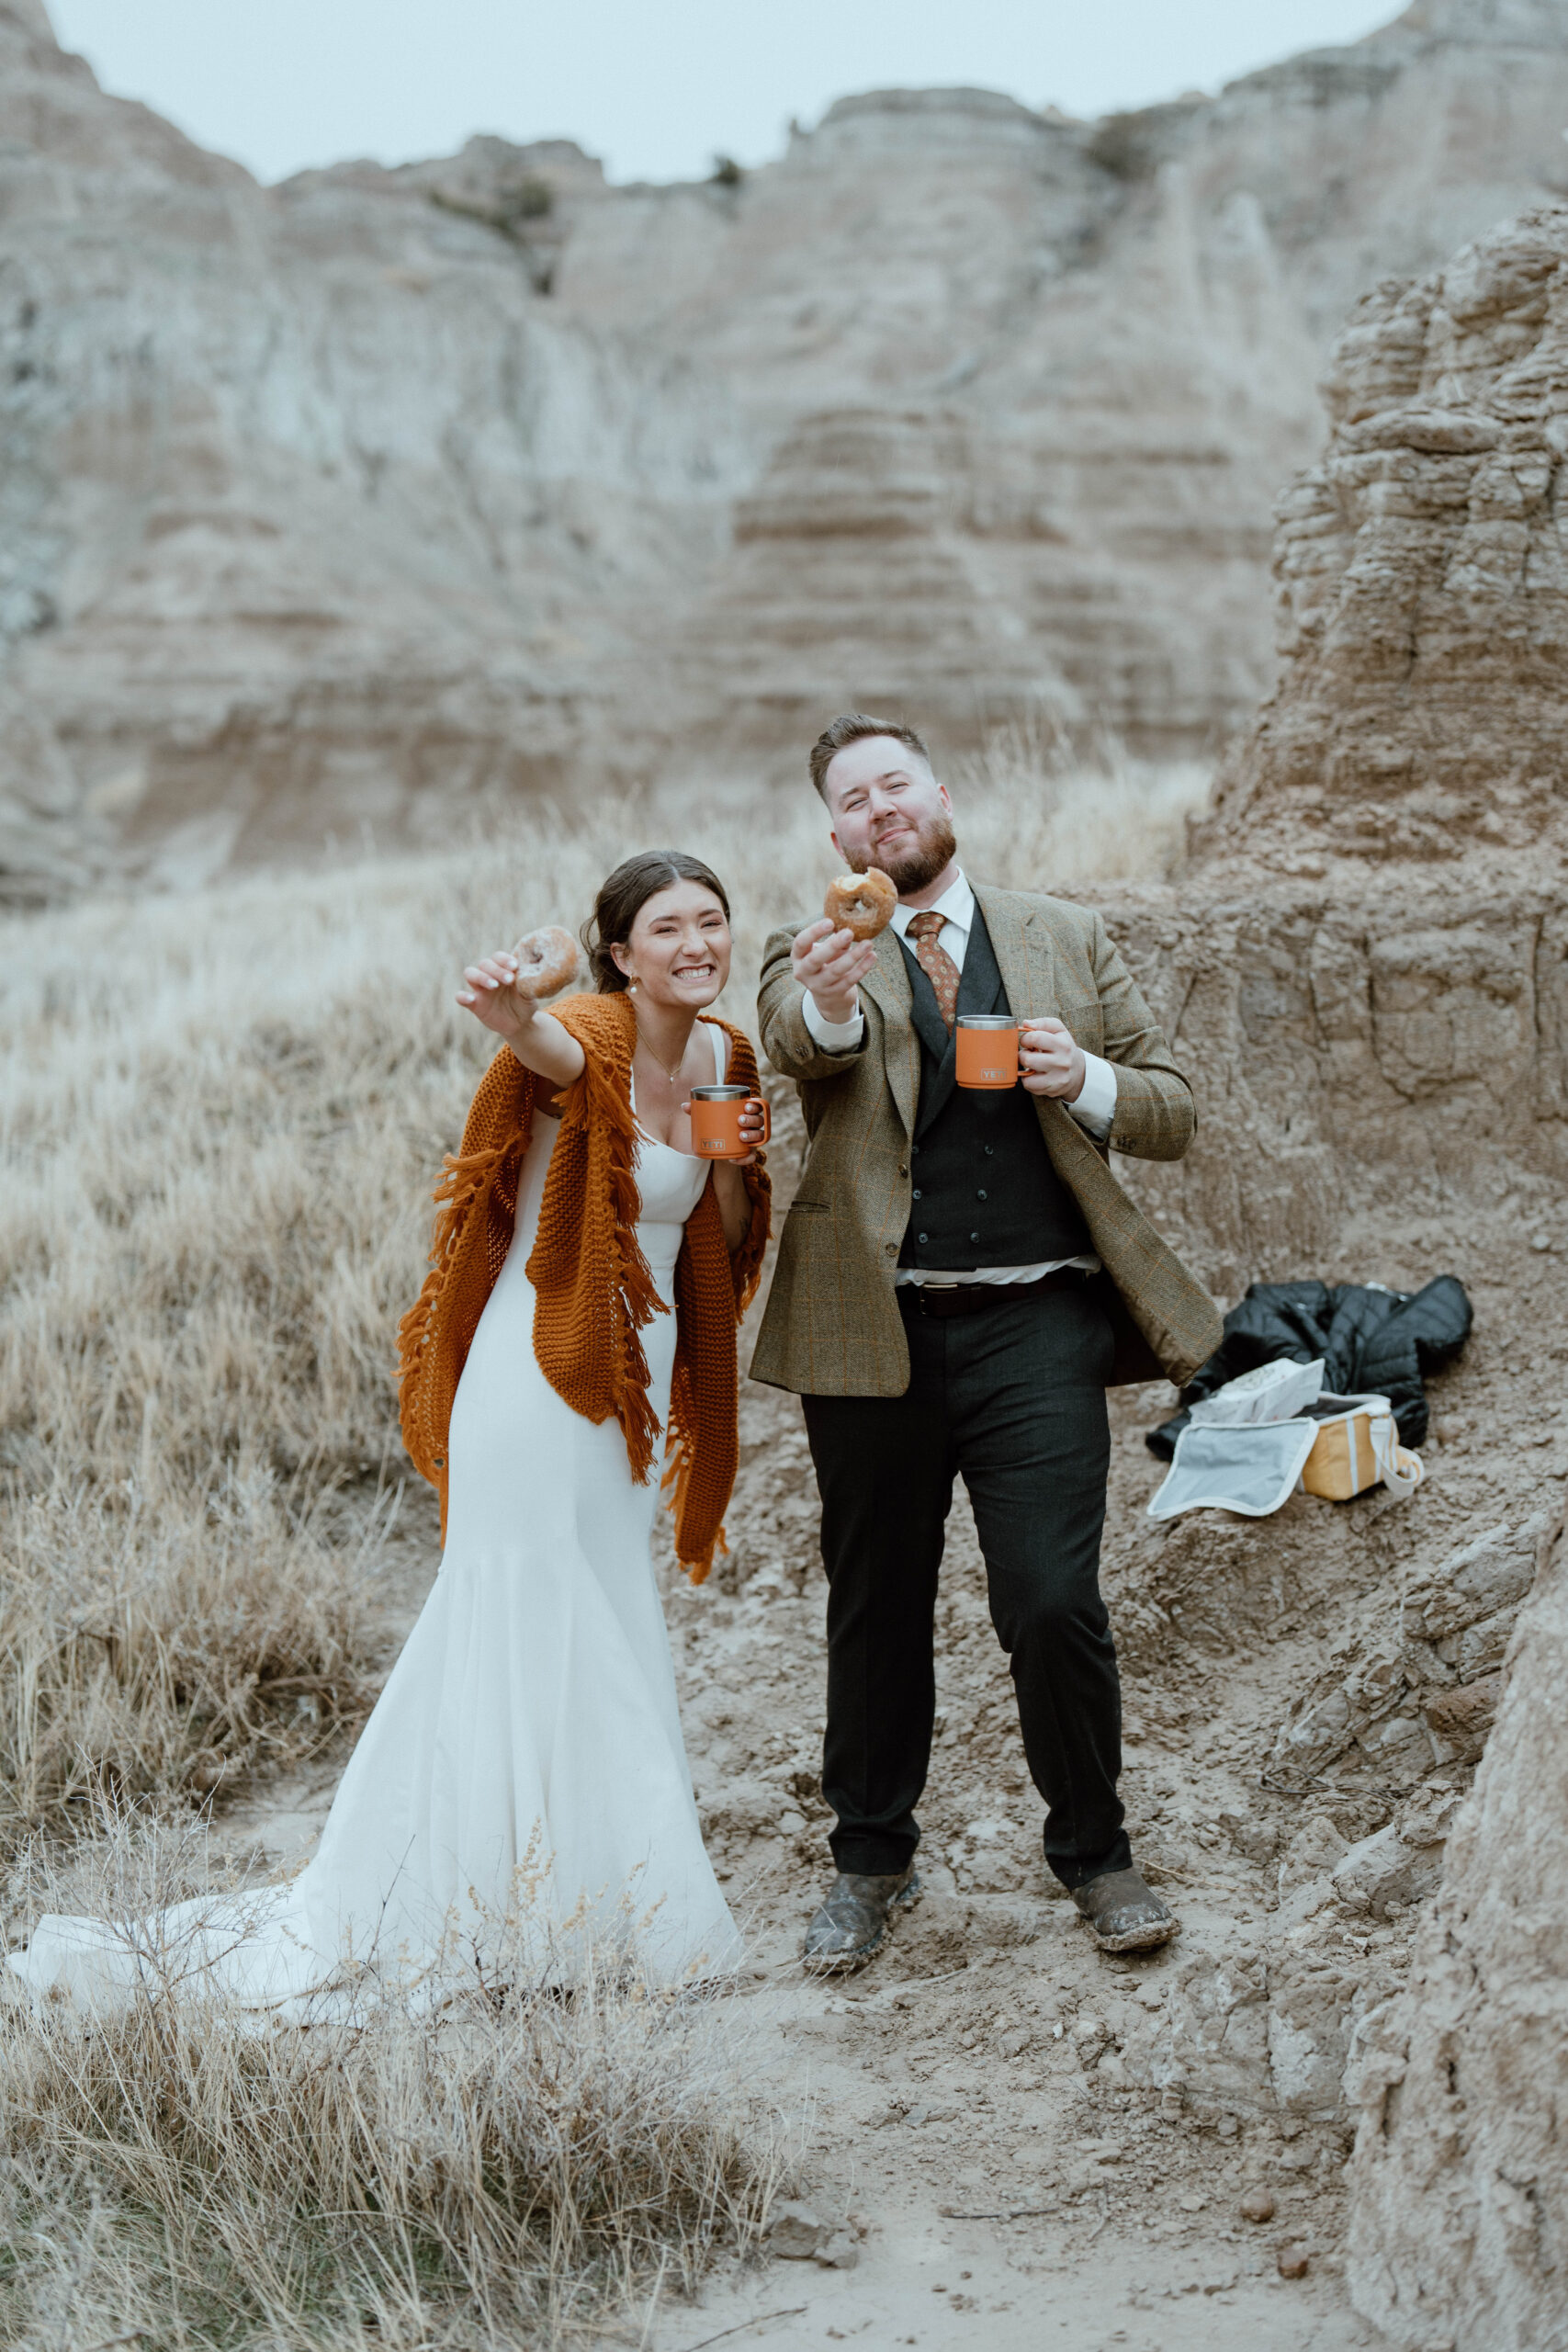 A newly married couple shares donuts after their elopement